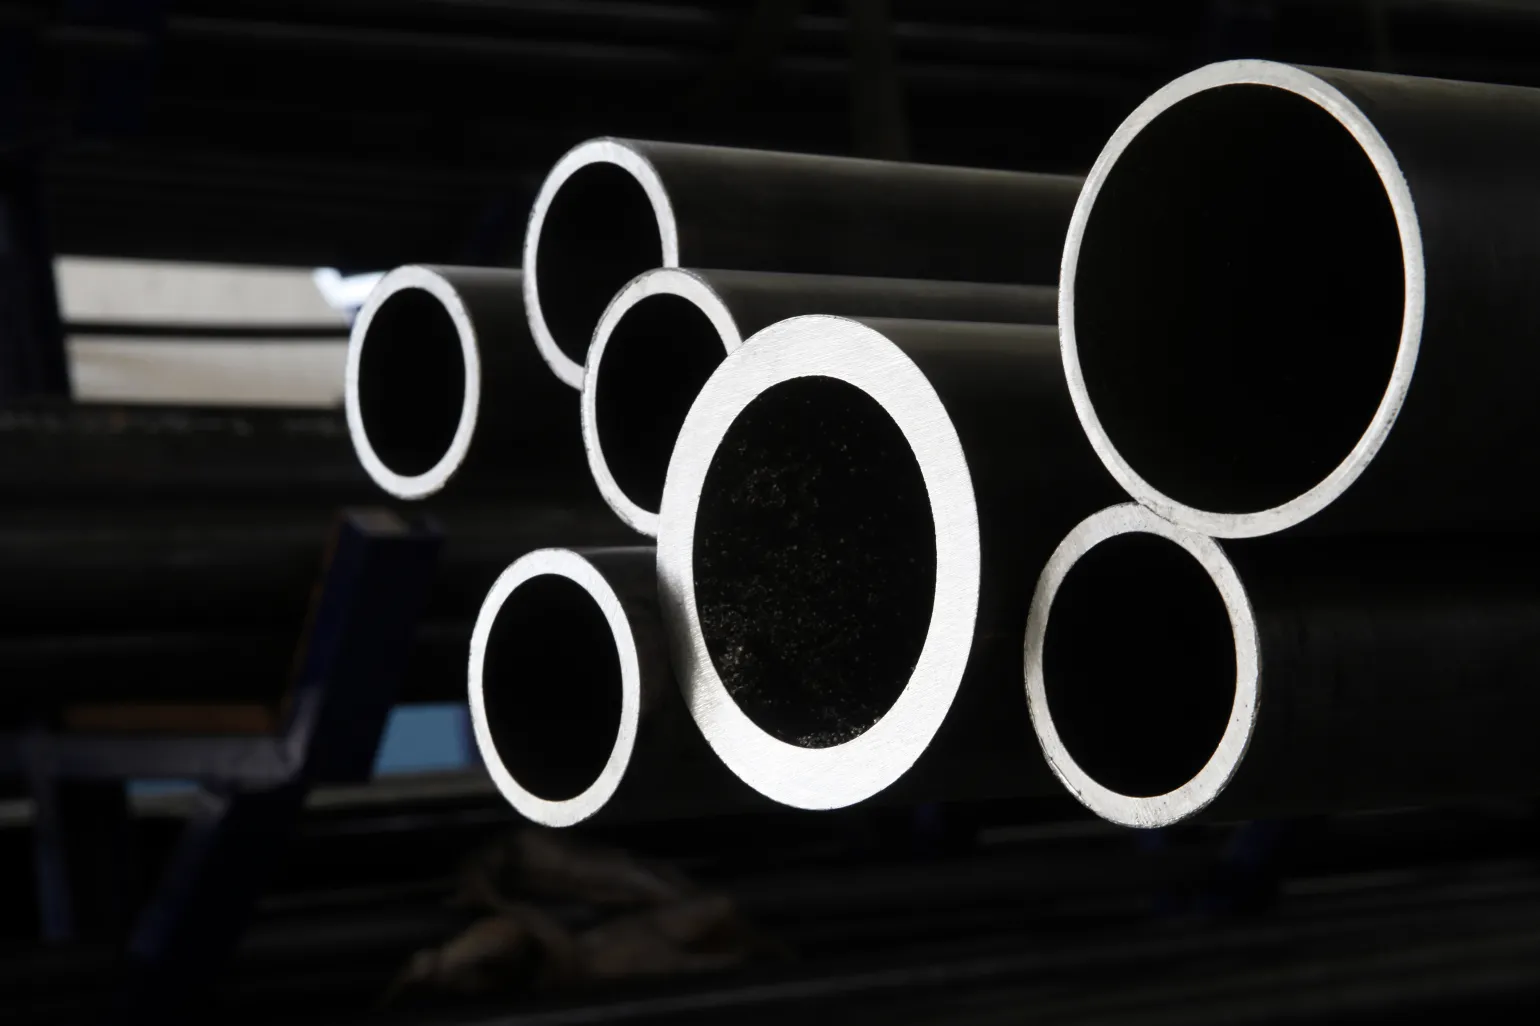 Tubular steel is naturally extremely strong, particularly against longitudinal stress. Steel tubing can withstand a huge amount of lengthways compression and will bend and flex before it cracks or breaks. The strength-to-weight ratio of hollow tubing is also far superior to a solid rod due to the tube’s inertia. This greater inertia provides extra resistance and strength against impact, vibration, and weight or pressure.
